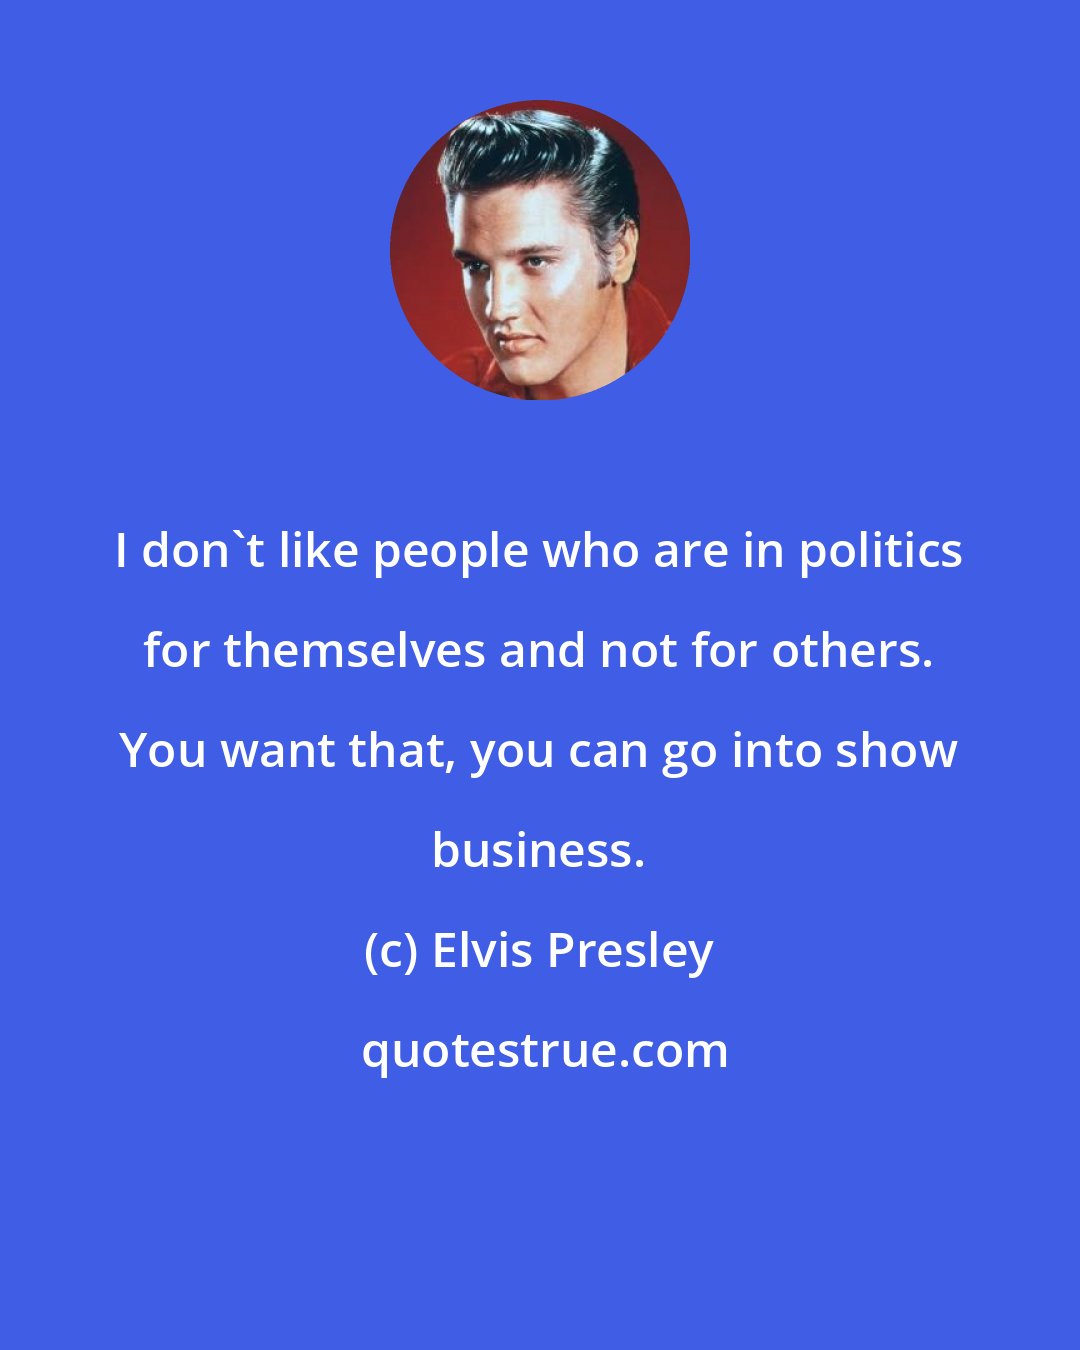 Elvis Presley: I don't like people who are in politics for themselves and not for others. You want that, you can go into show business.